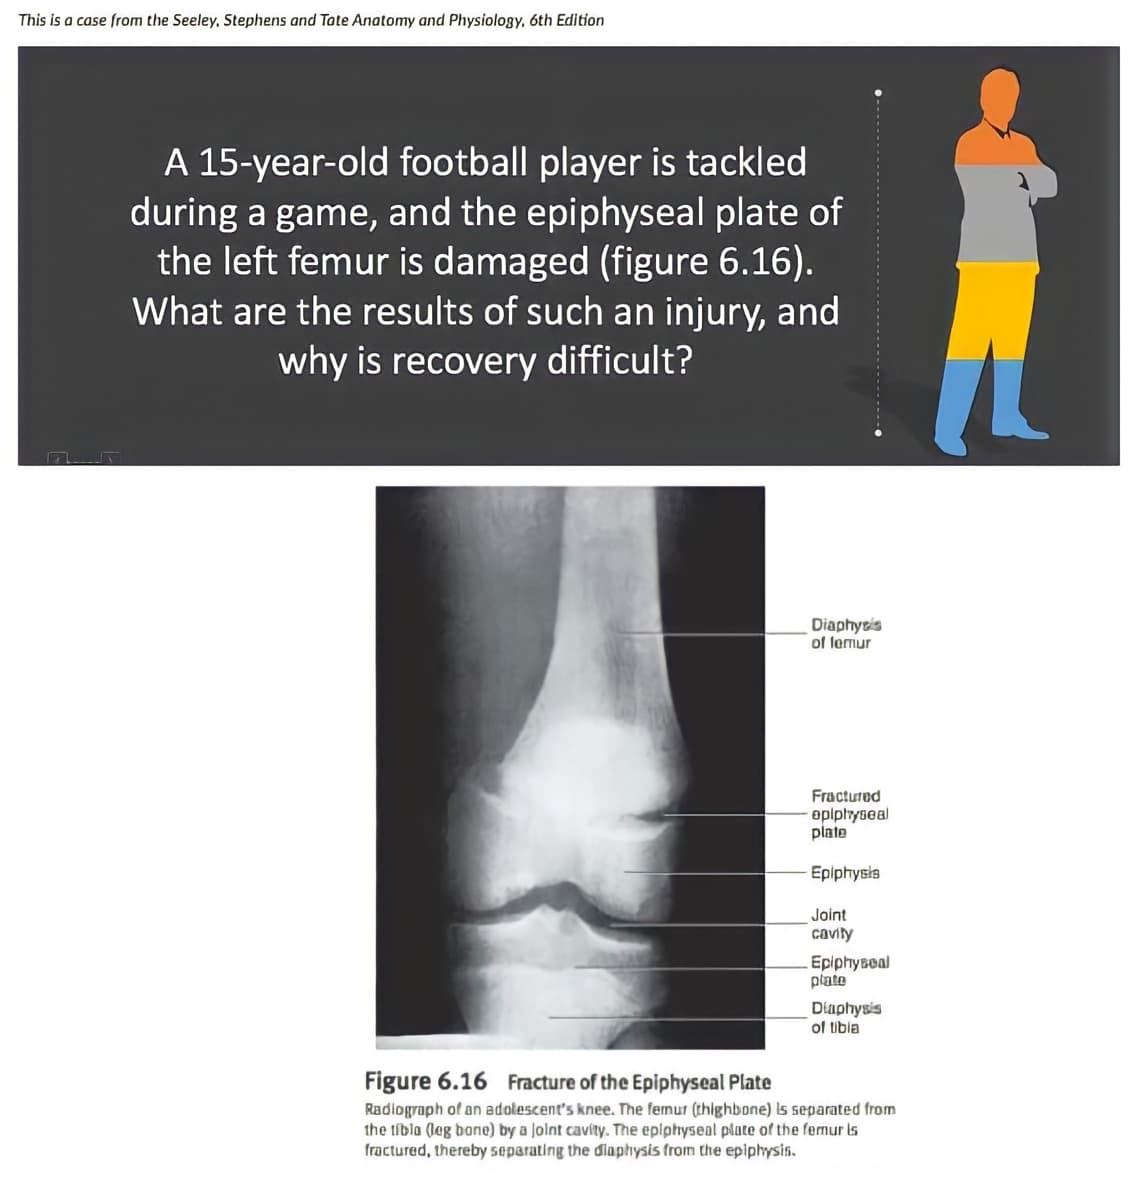 This is a case from the Seeley, Stephens and Tate Anatomy and Physiology, 6th Edition
A 15-year-old football player is tackled
during a game, and the epiphyseal plate of
the left femur is damaged (figure 6.16).
What are the results of such an injury, and
why is recovery difficult?
Diaphyris
of lemur
Fractured
eplphyseal
plate
Eplphysia
Joint
cavity
Epiphyseal
plate
Diaphysis
of tibla
Figure 6.16 Fracture of the Epiphyseal Plate
Radlograph of an adolescent's knee. The femur (thighbone) s separated from
the tibla (leg bane) by a Jolnt cavíty. The eplphysenl plate of the femur is
fractured, thereby separating the diaphysis from the epiphysis.
